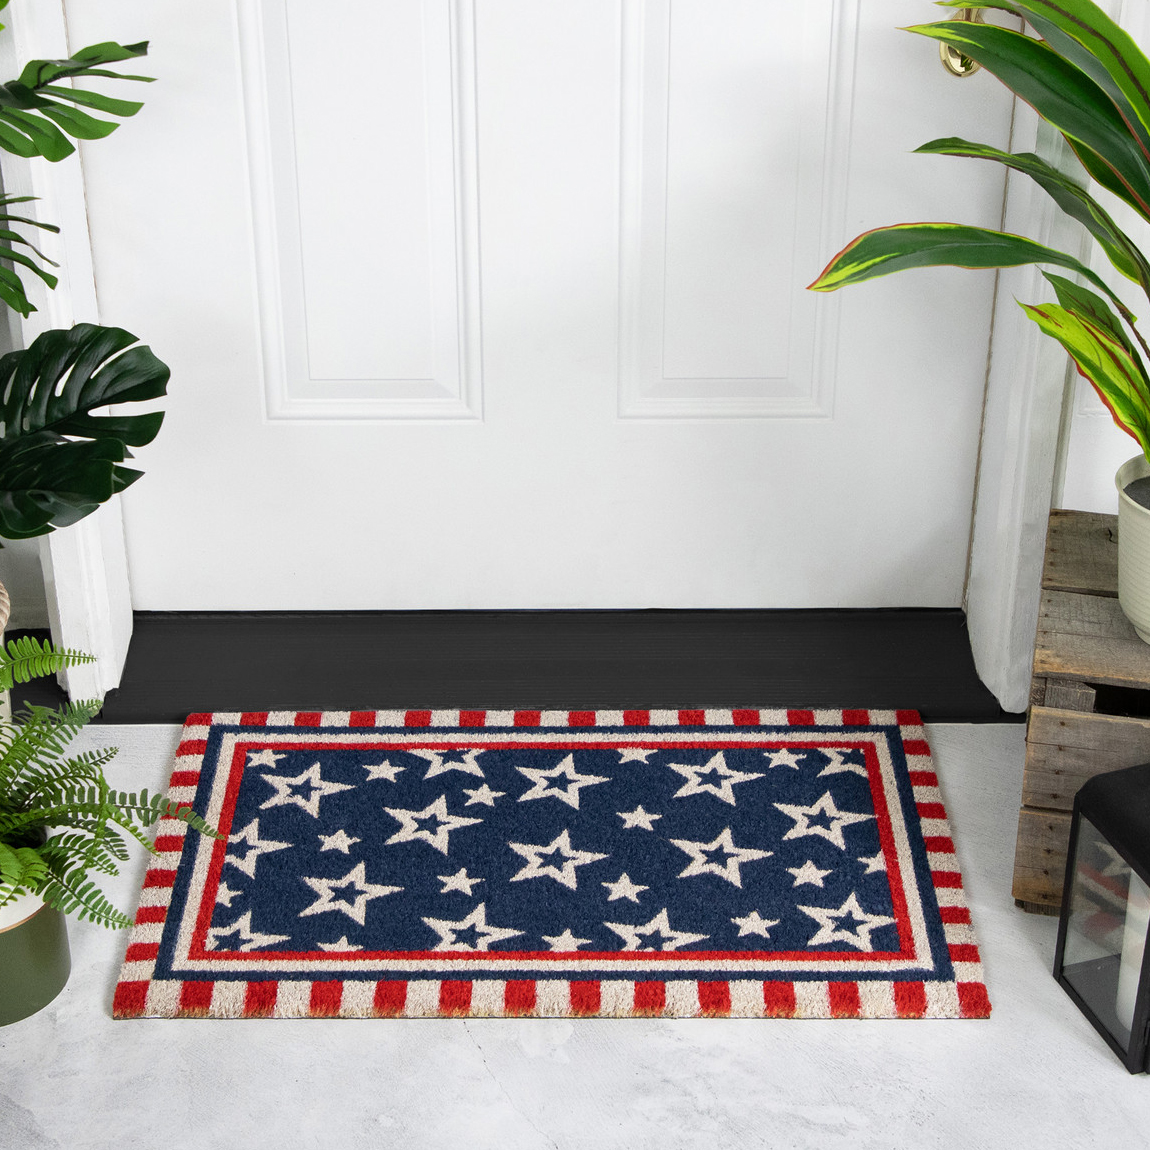 blue stars with red and white striped border coir doormat